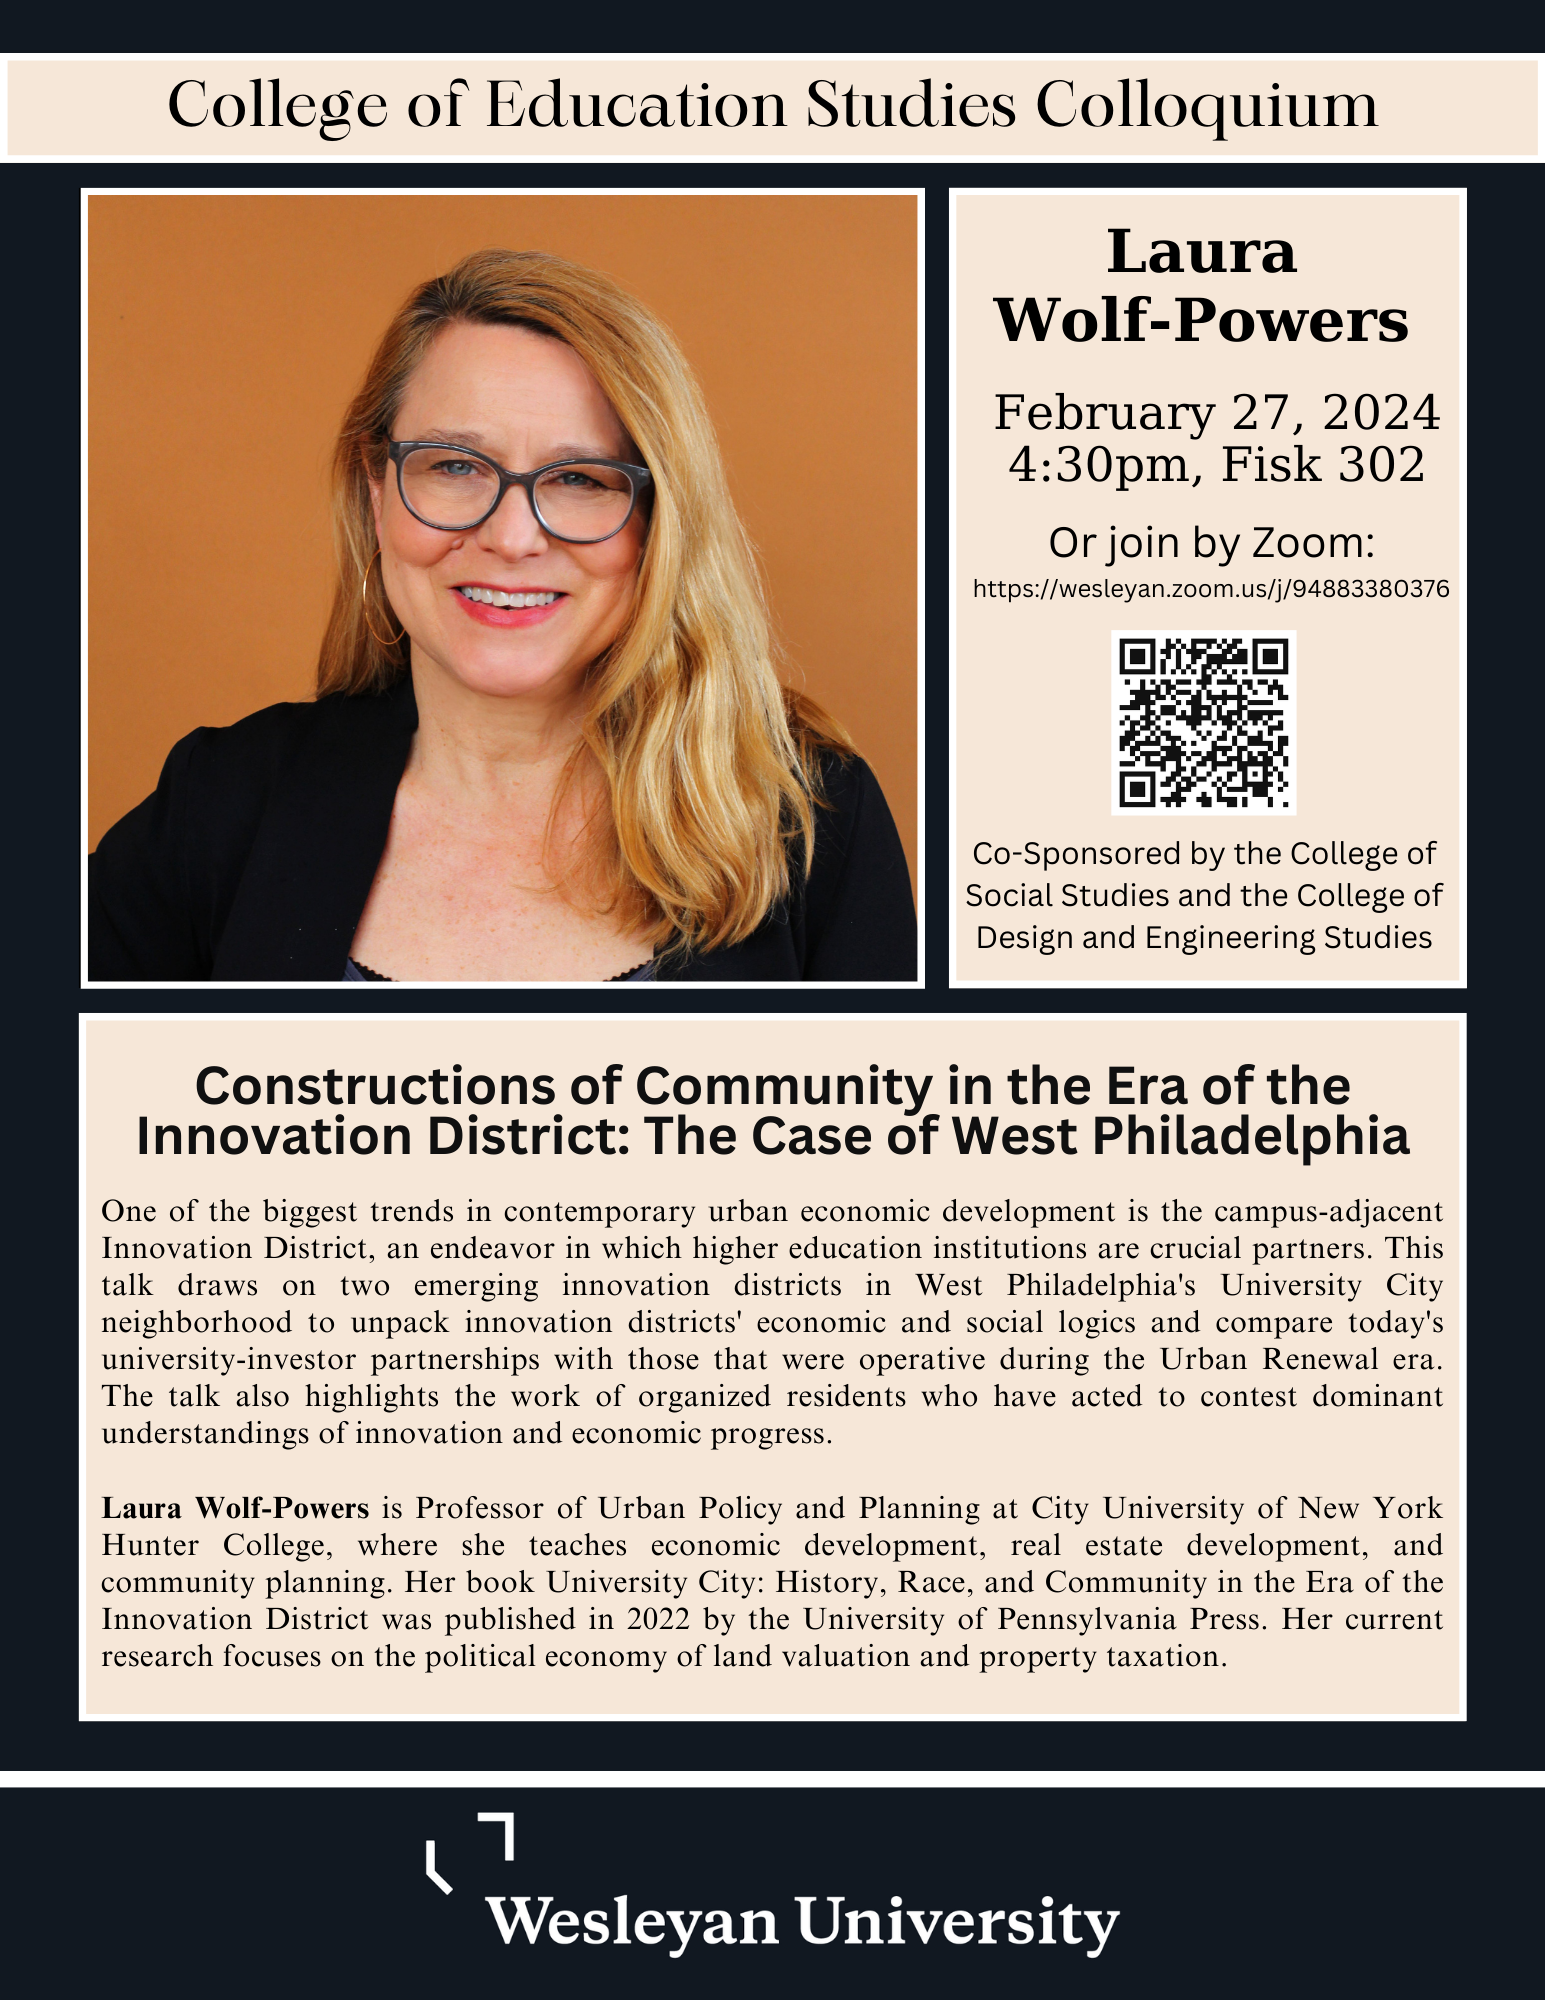 Laura-Wolf-Powers_022724.png